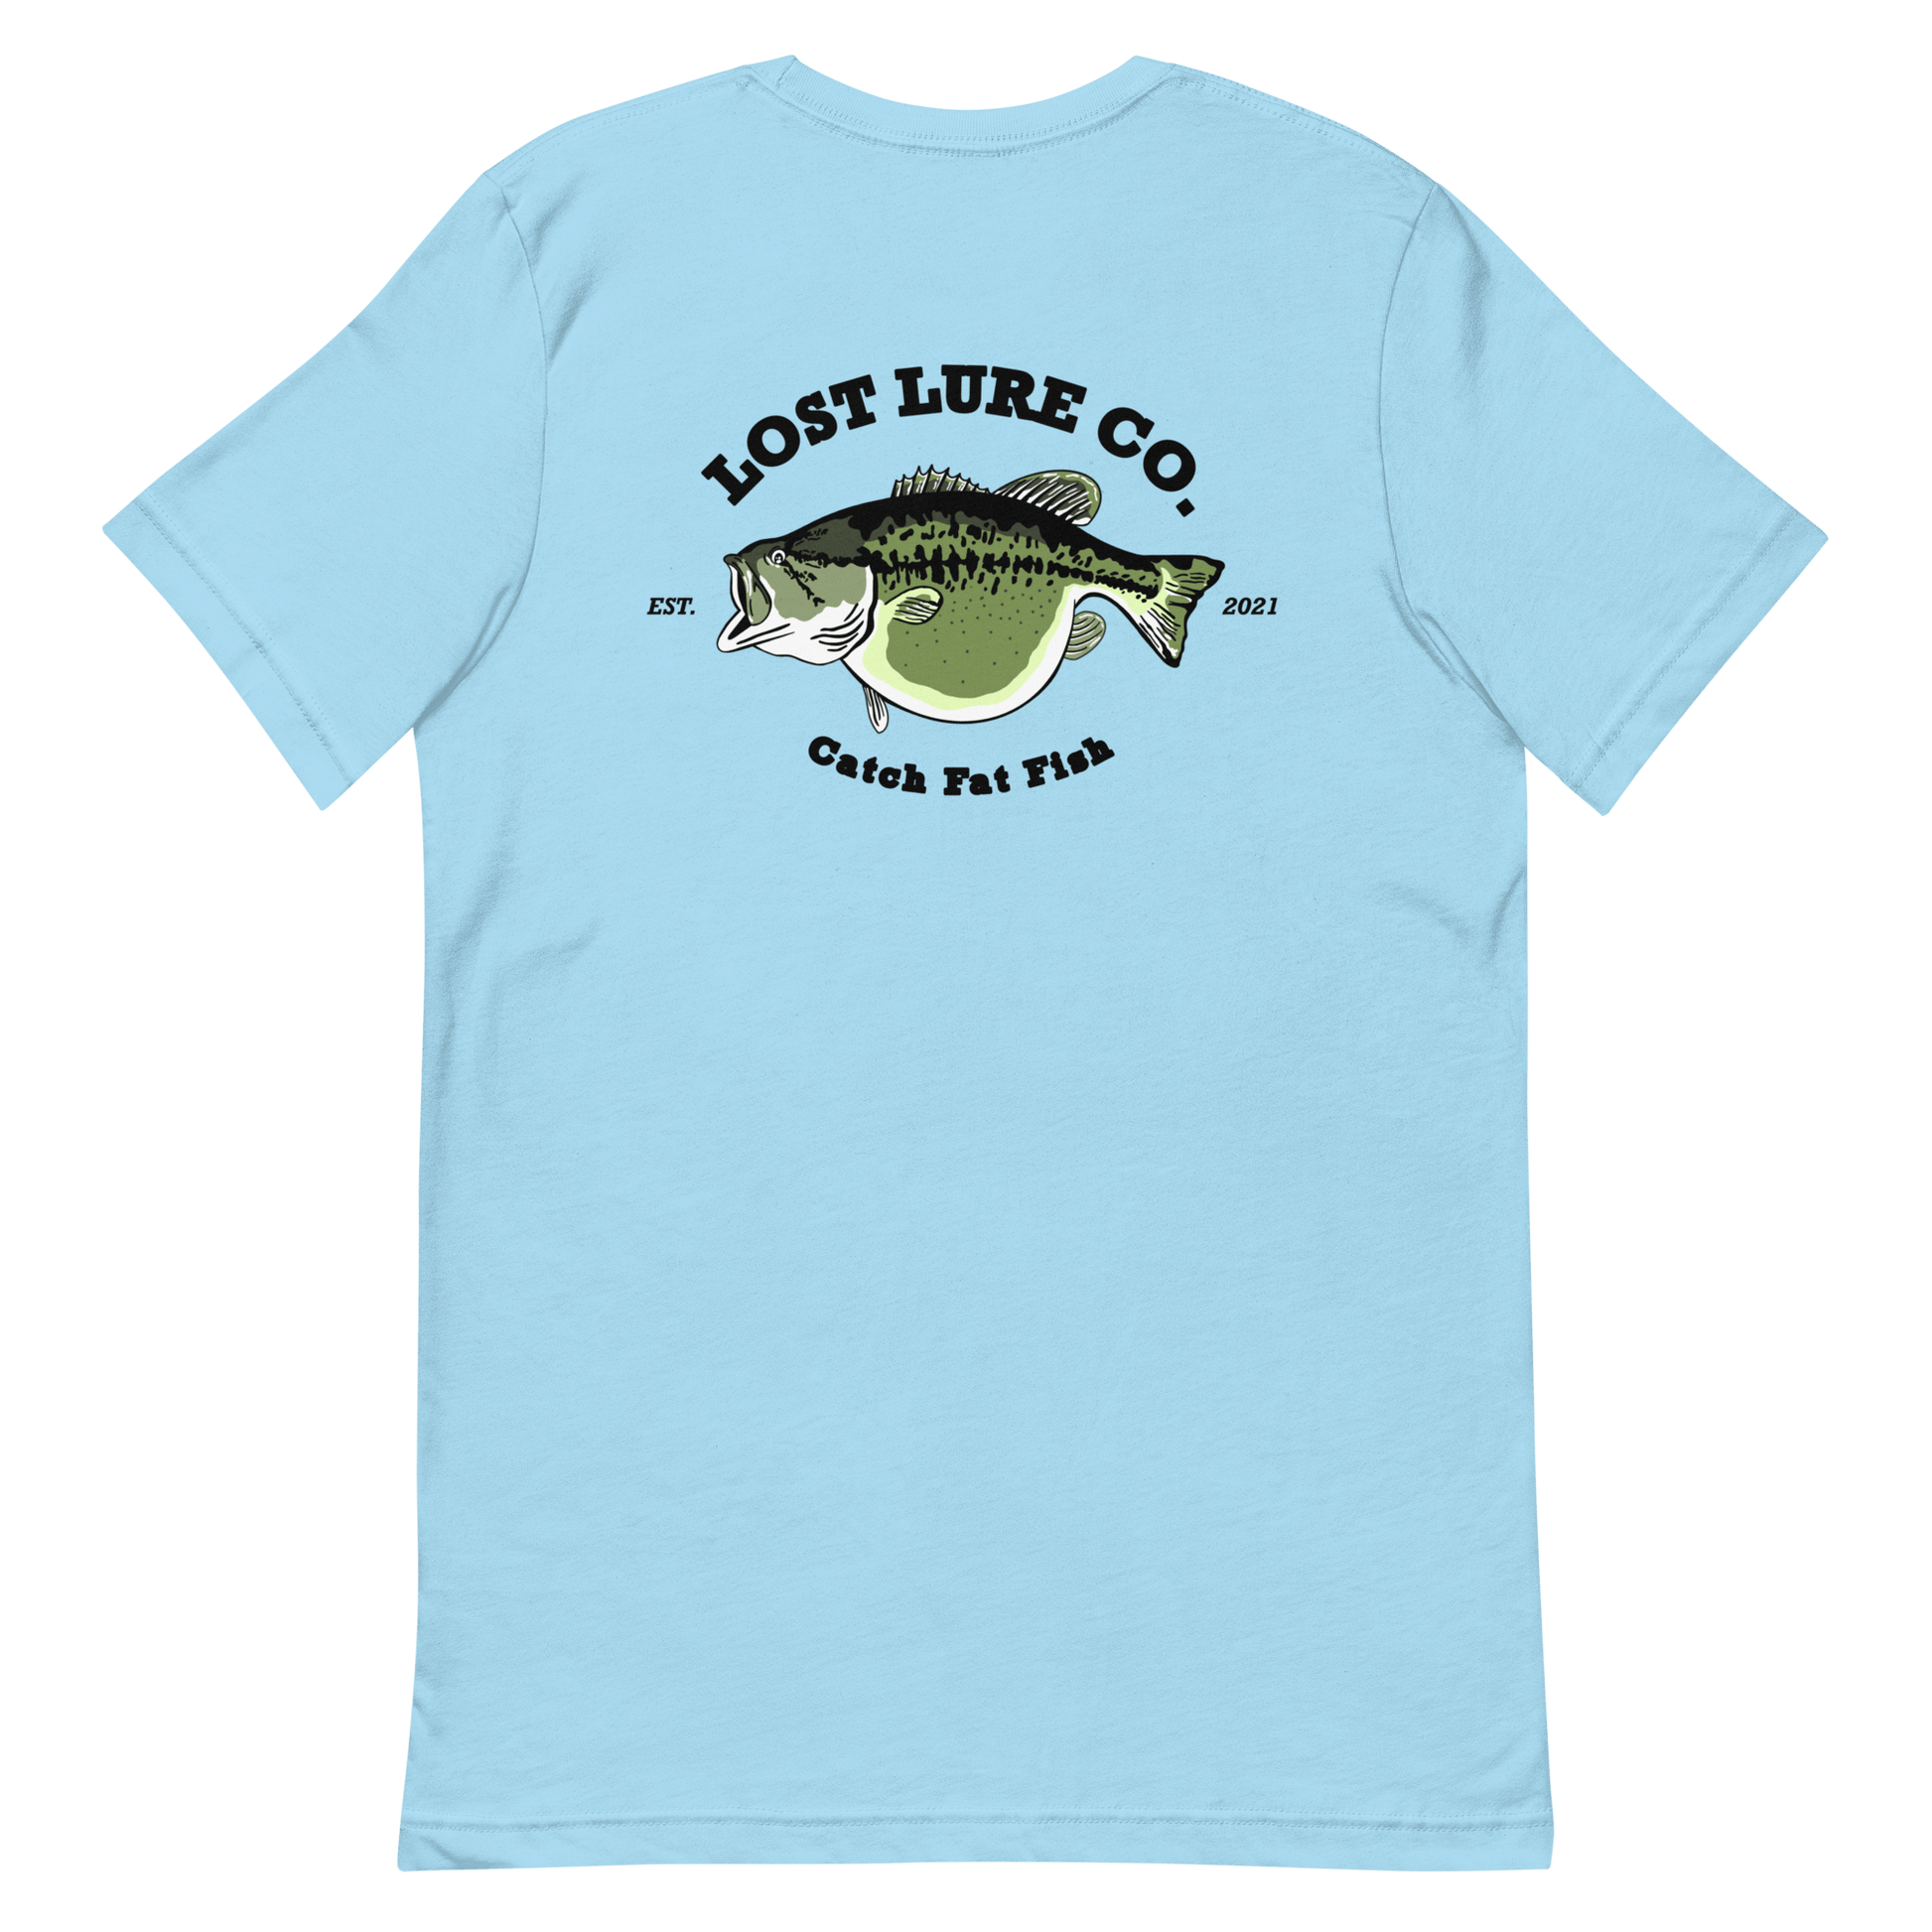 Bass fishing shirt. It has a drawing of a fat bass and it reads “lost lure co, catch fat fish”. The bass design is on the back, the lost lure logo is on the front. Baby blue shirt, back side